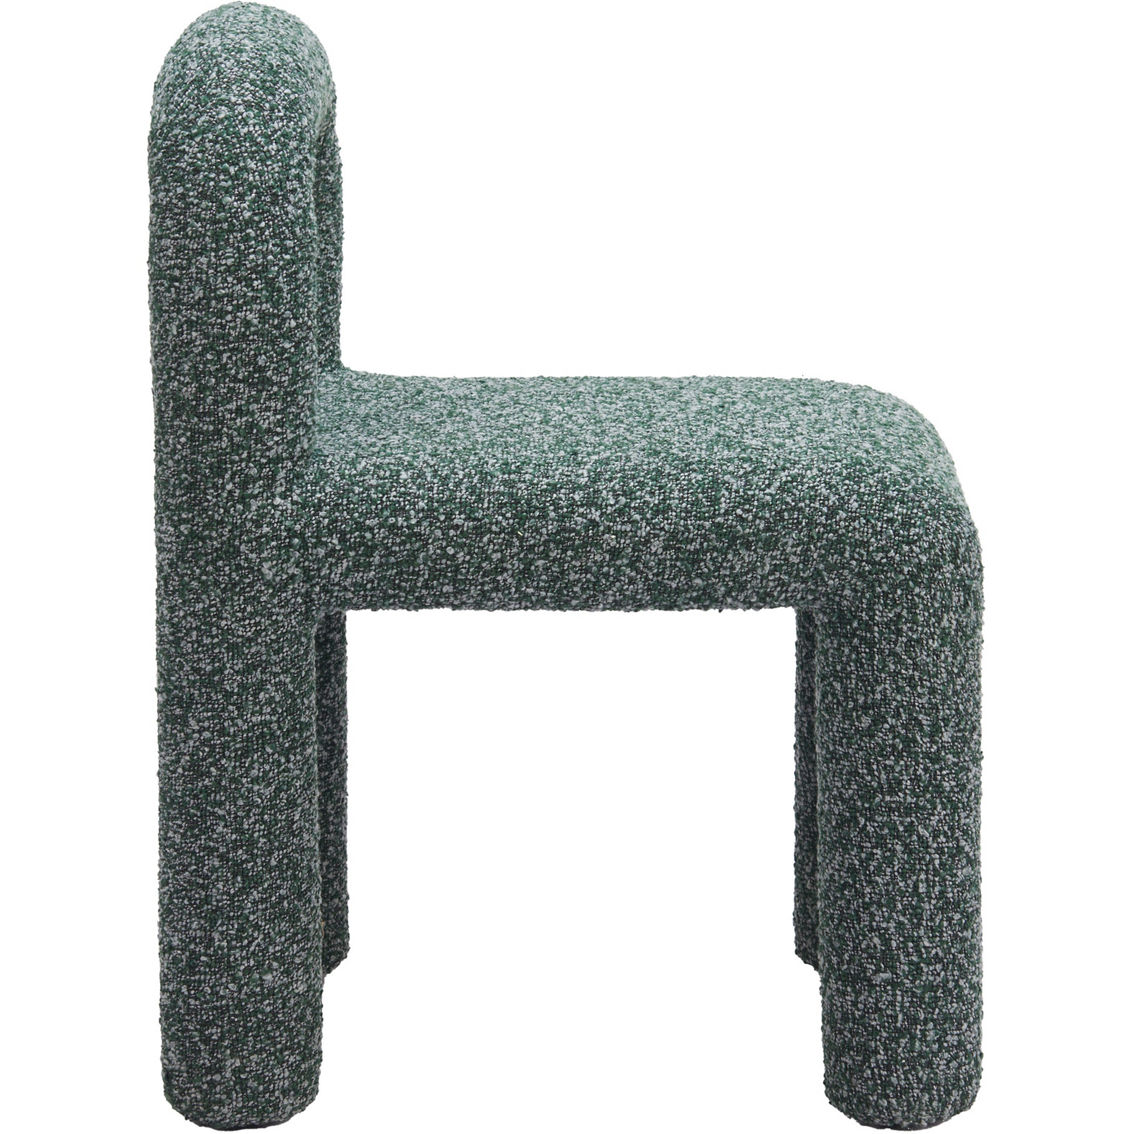 Zuo Modern Arum Dining Chairs Snowy Green 2 pk. - Image 7 of 8